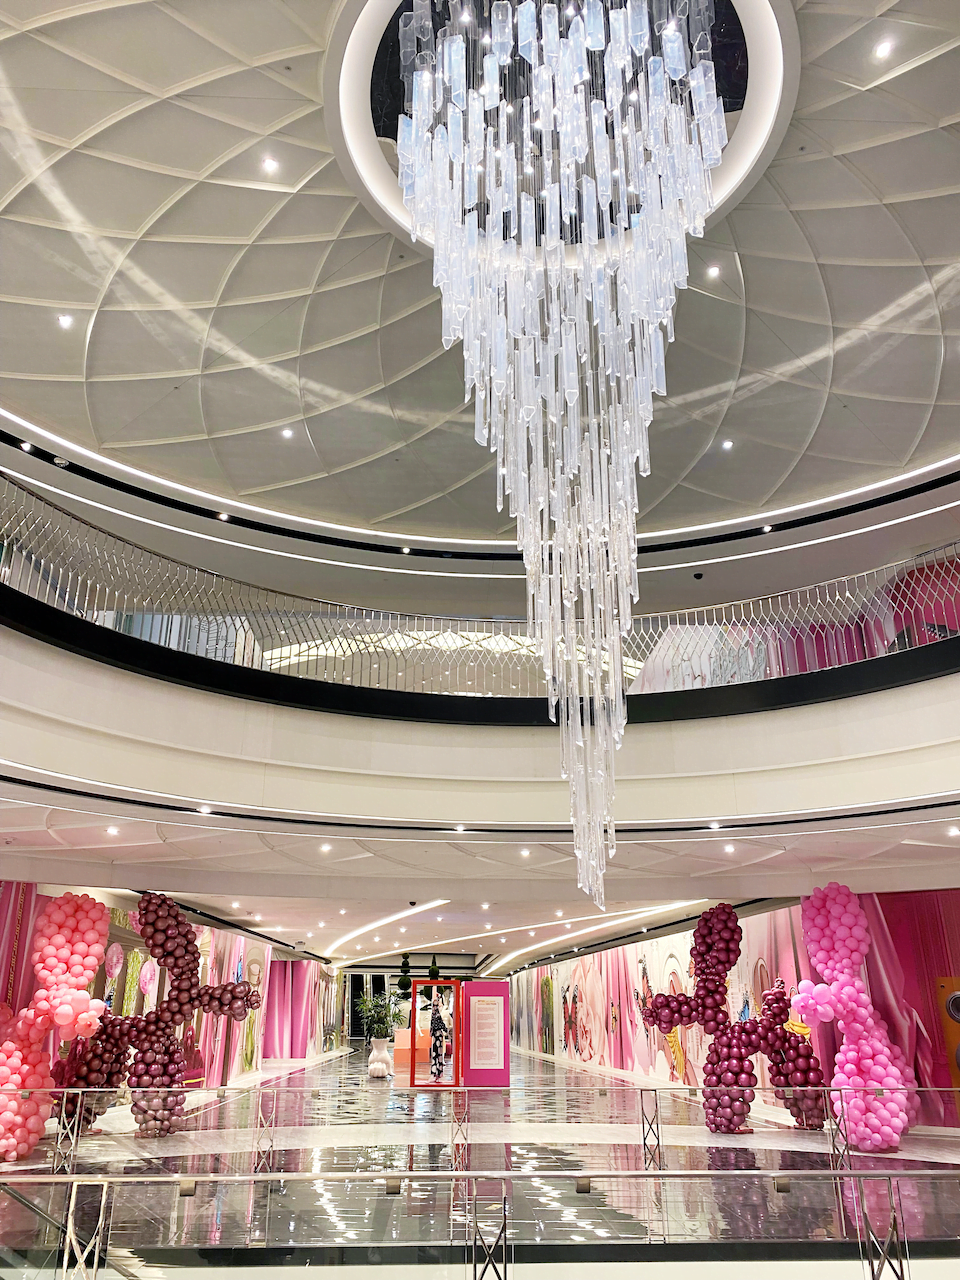 First Look: American Dream opens its 300,000-sq.-ft. luxury retail wing